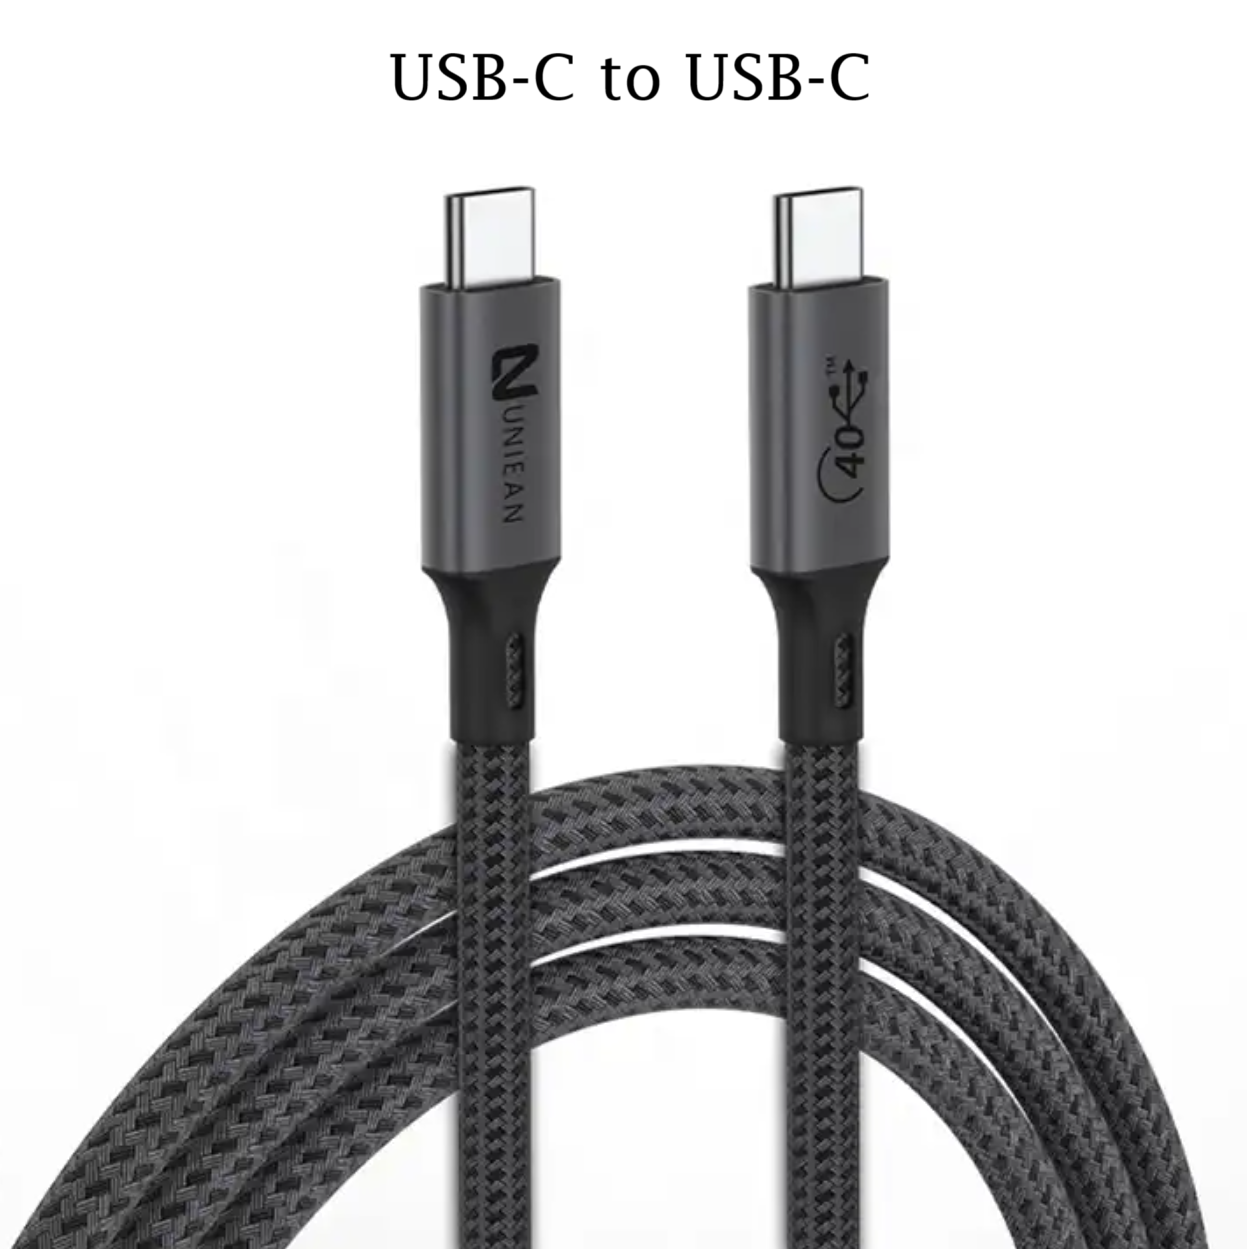 Yulian USB4 cable | full-featured coaxial C2C | comp Thunderbolt 4 | 1m